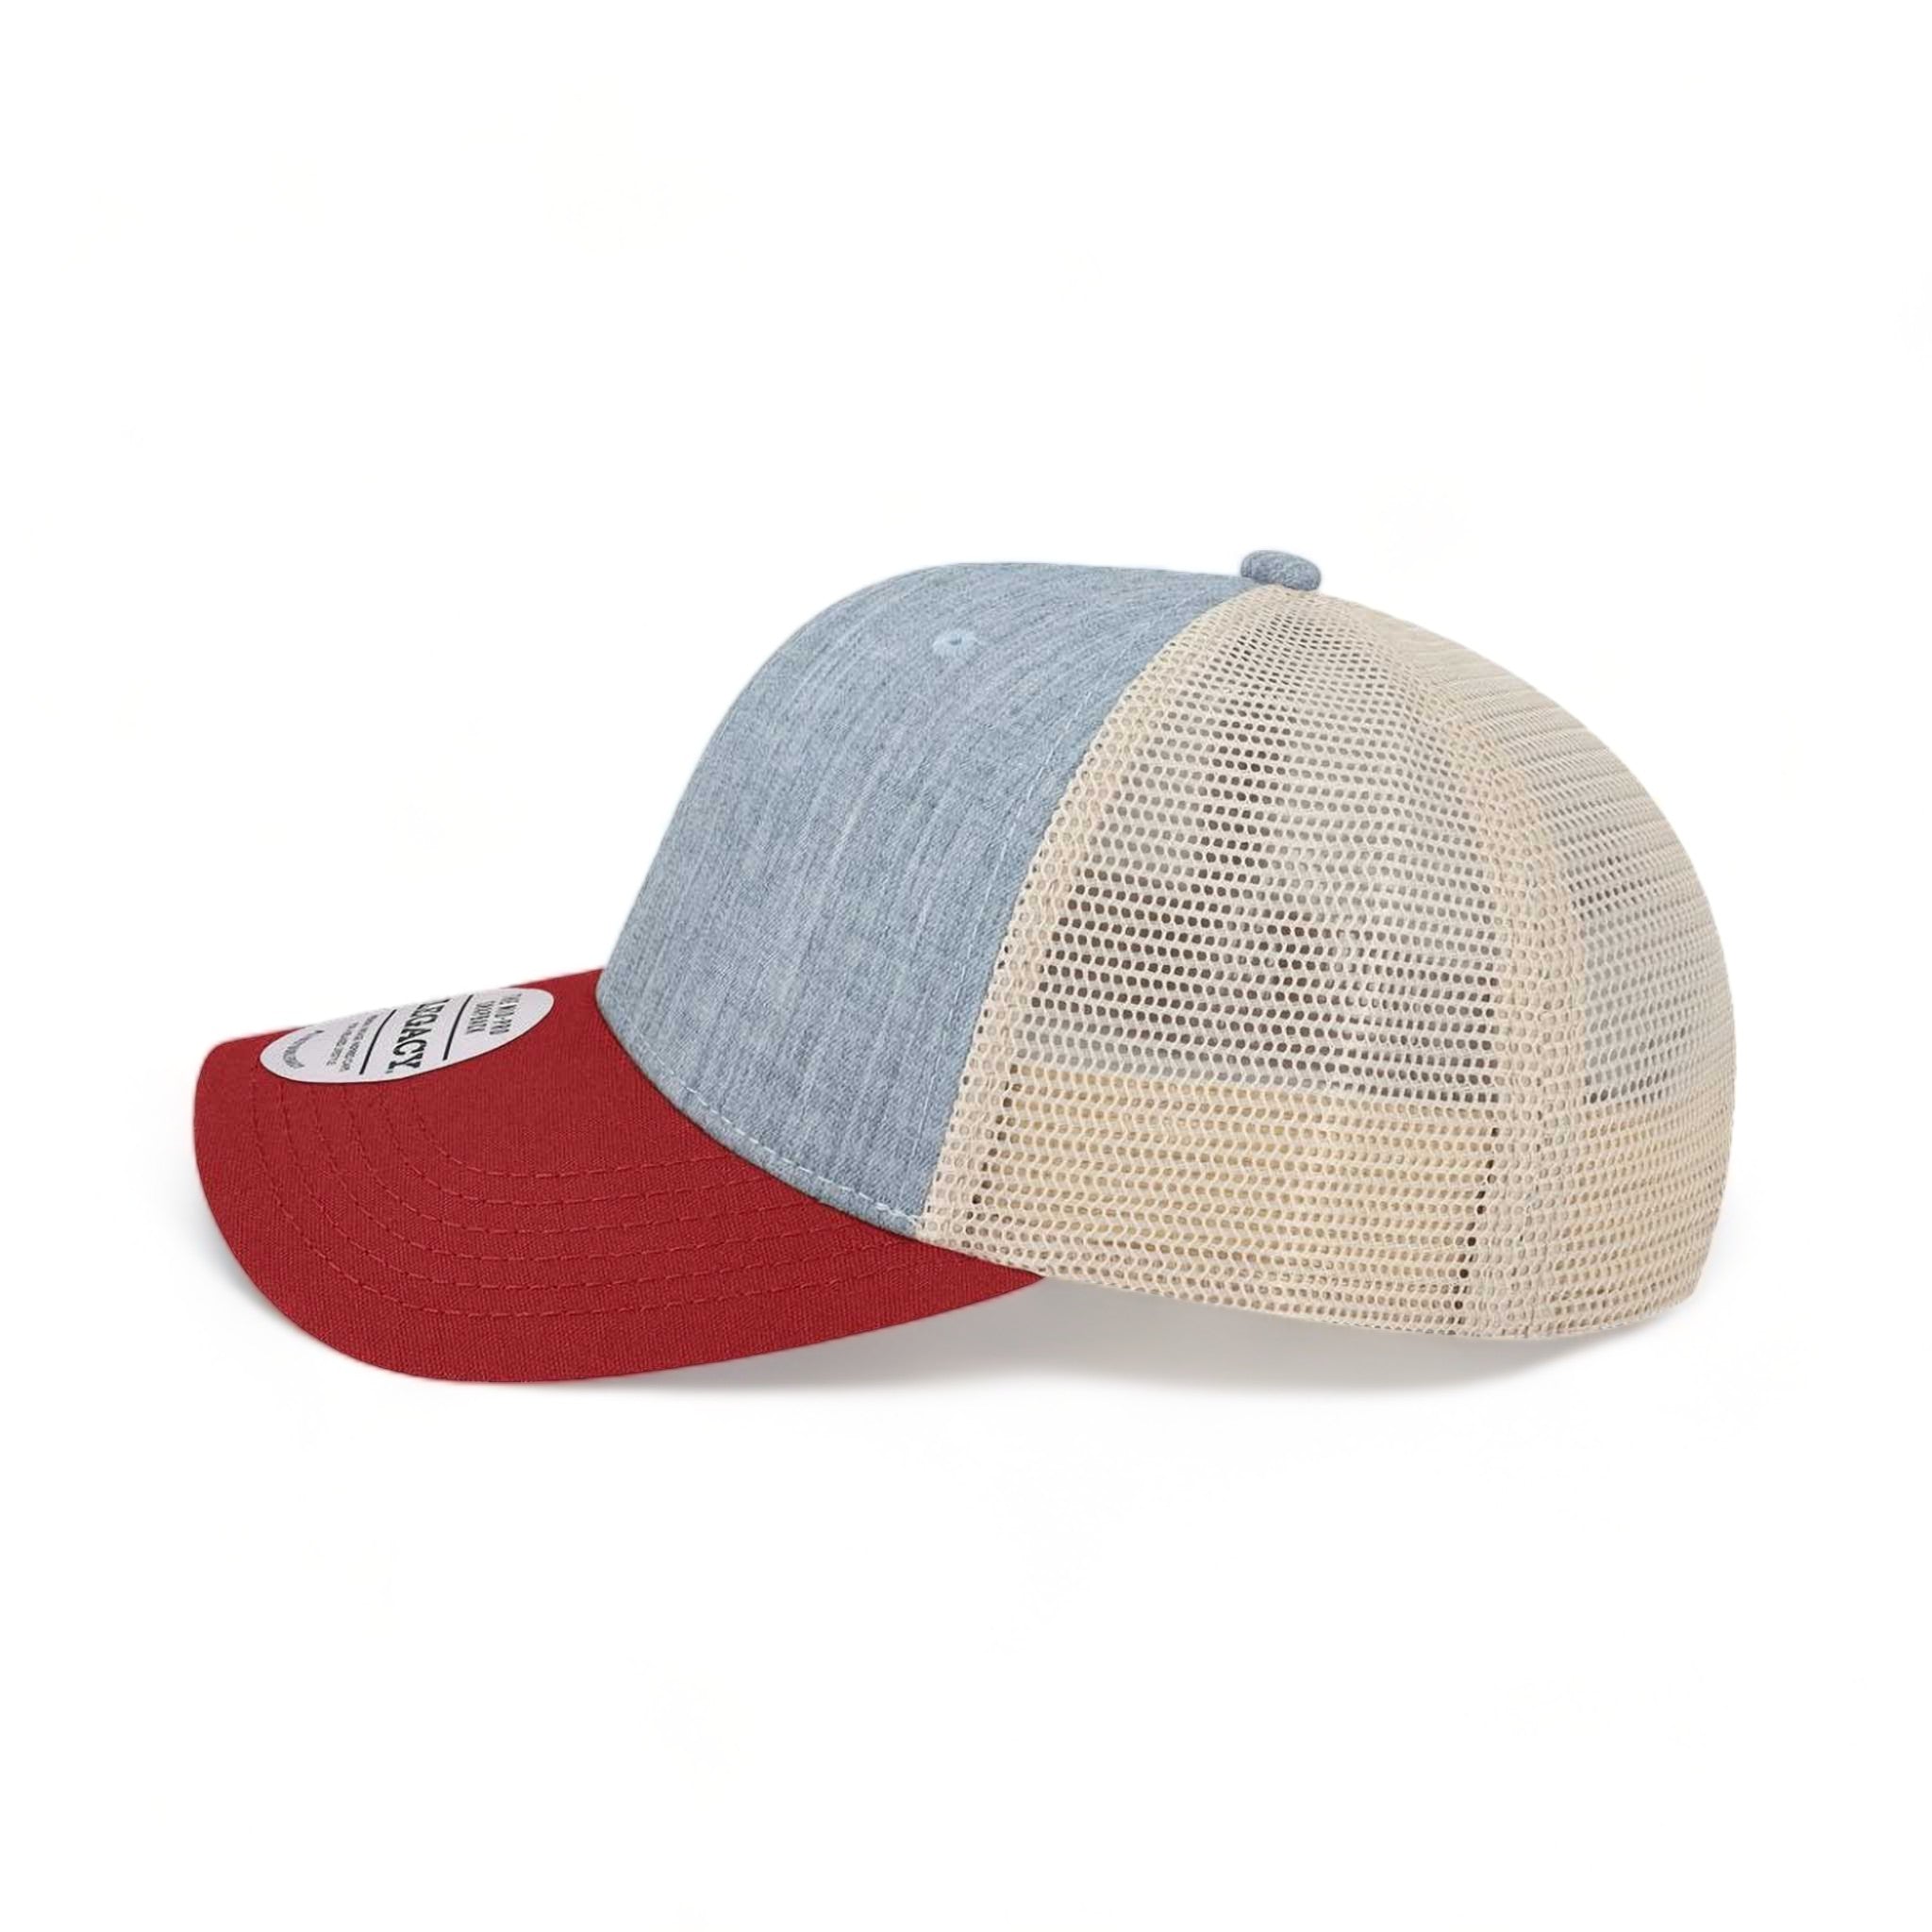 Side view of LEGACY MPS custom hat in mélange light blue, cardinal and stone